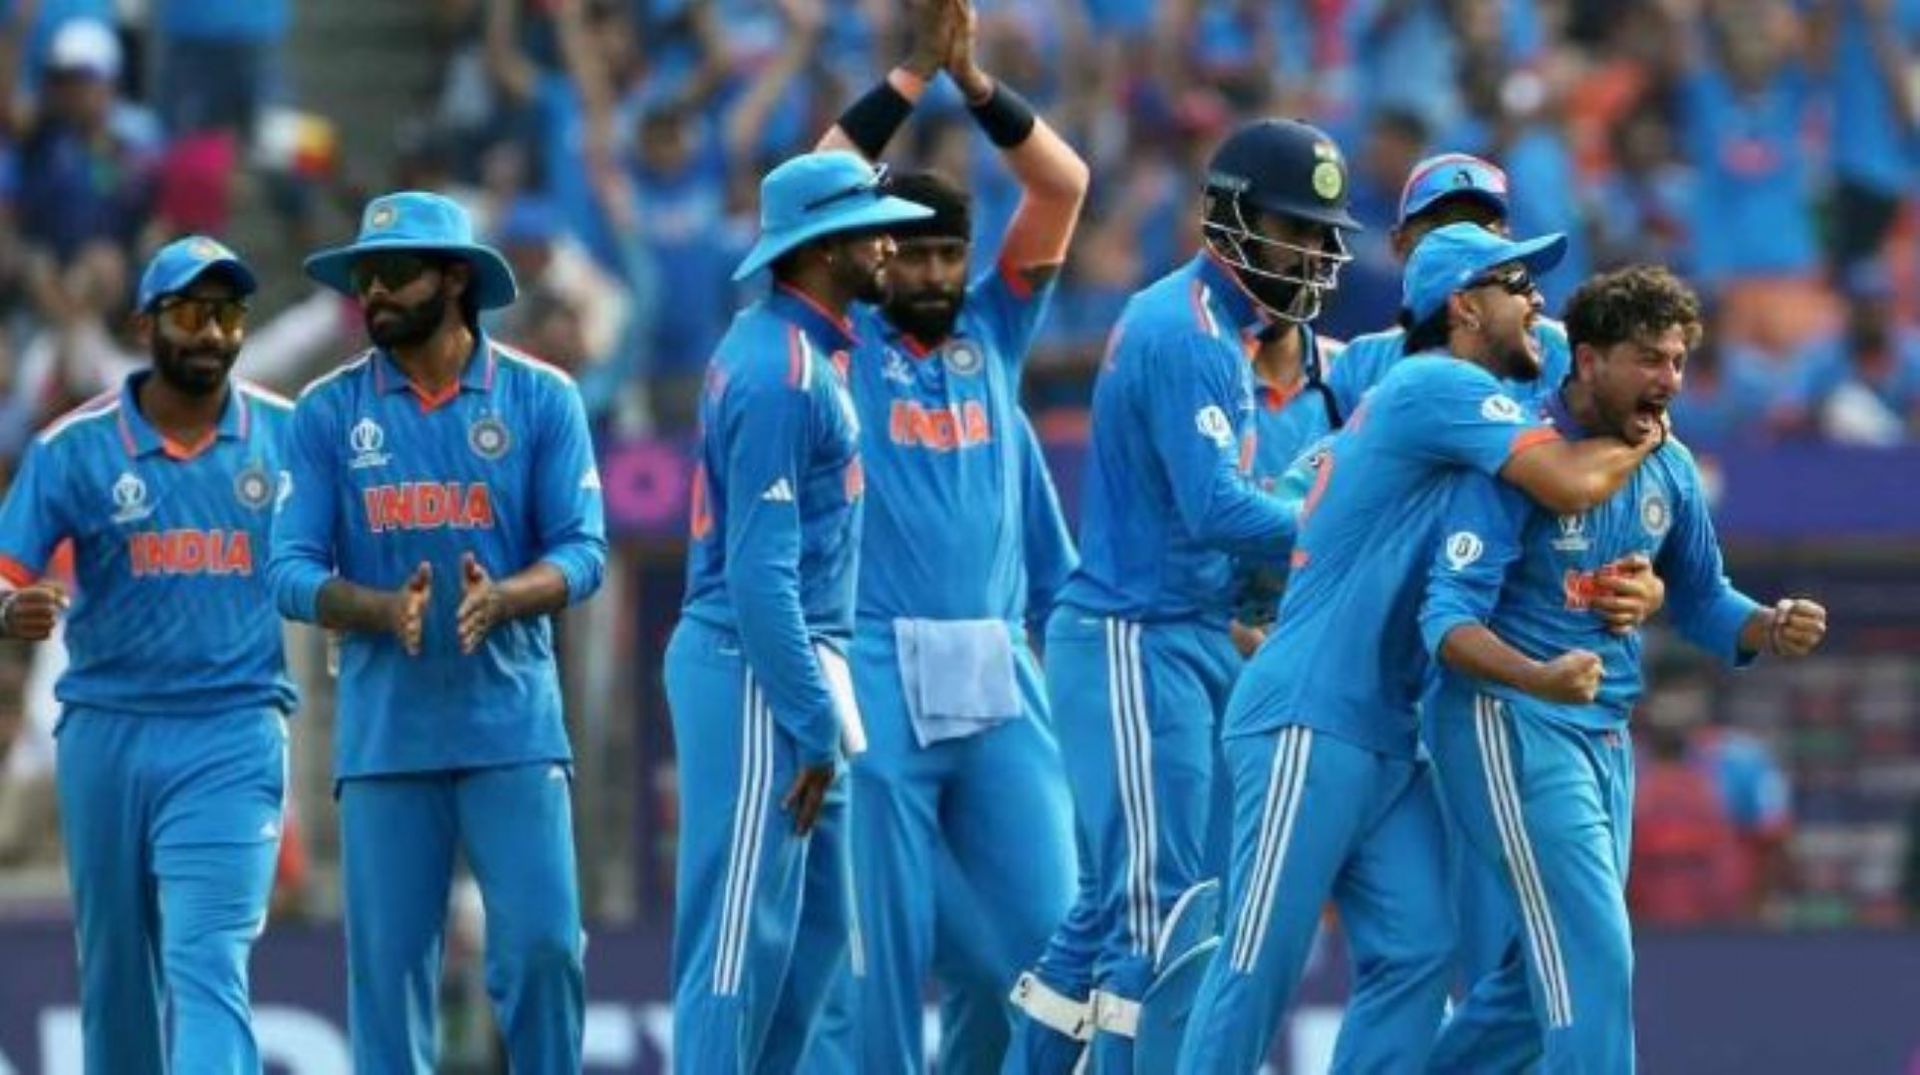 Team India are overwhelming favorites to win their third ODI World Cup.